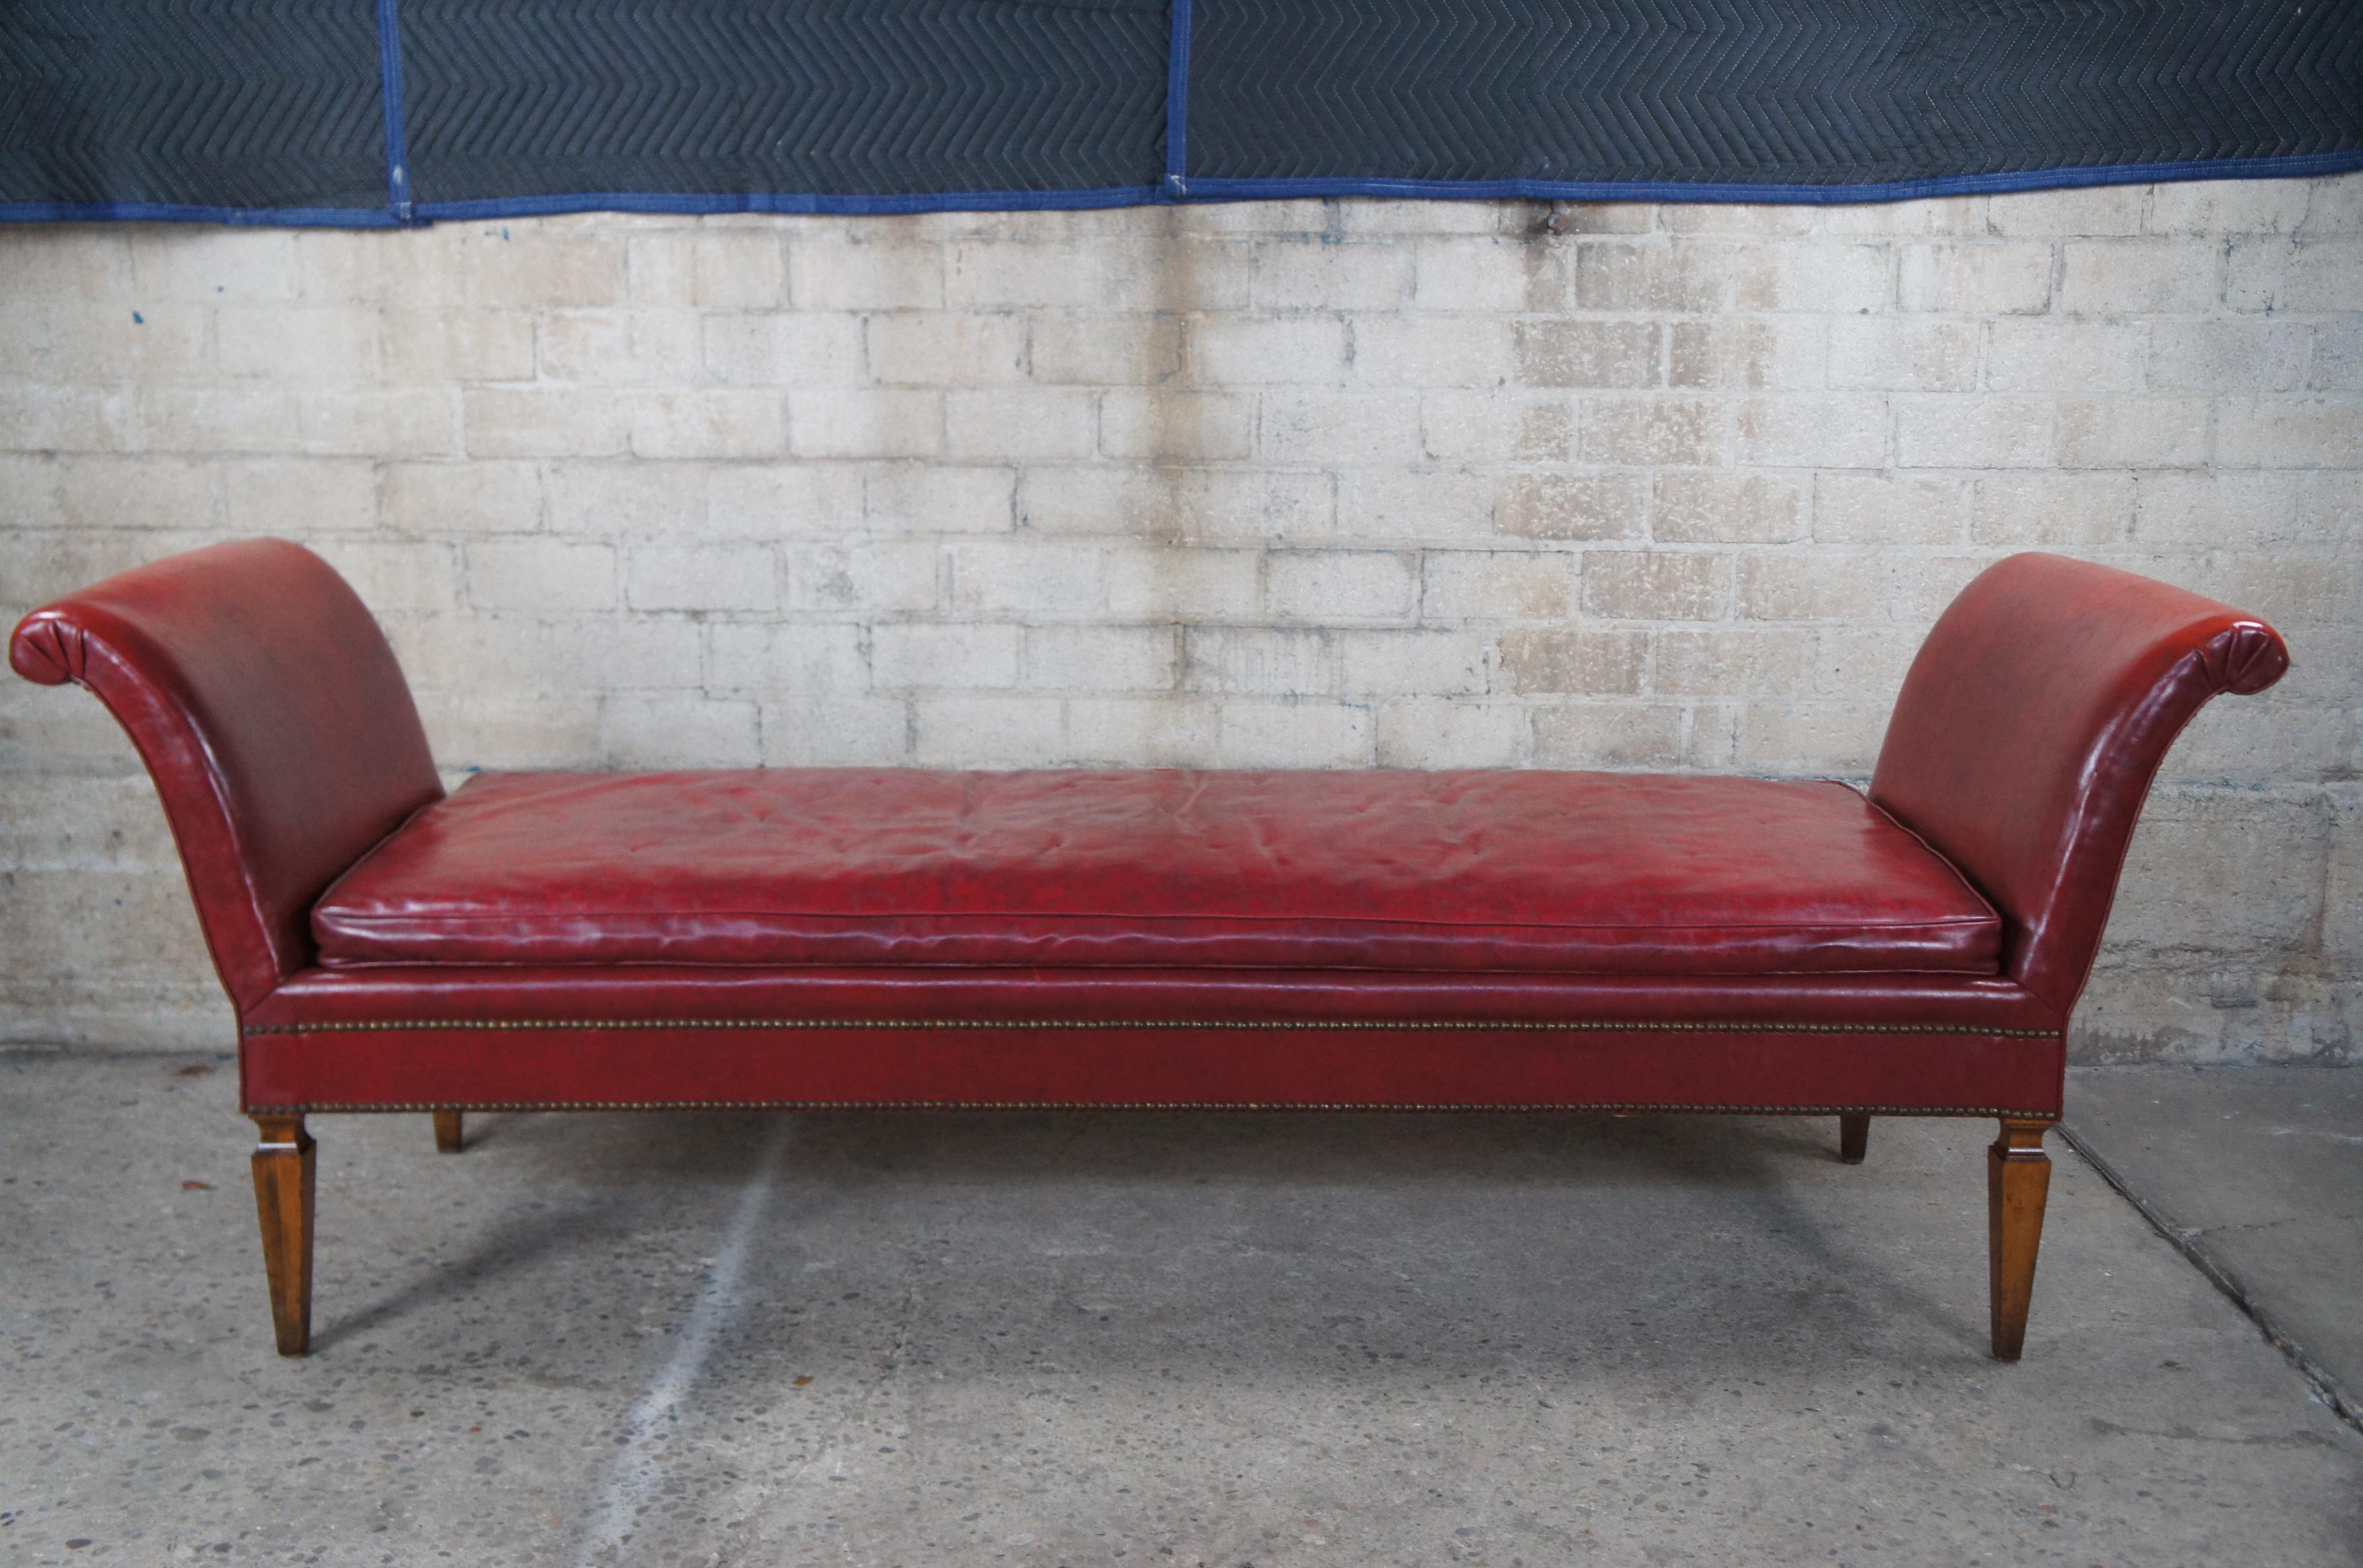 Midcentury Mahogany & Red Leather Scroll Arm Chaise Lounge Daybed Bench For Sale 5